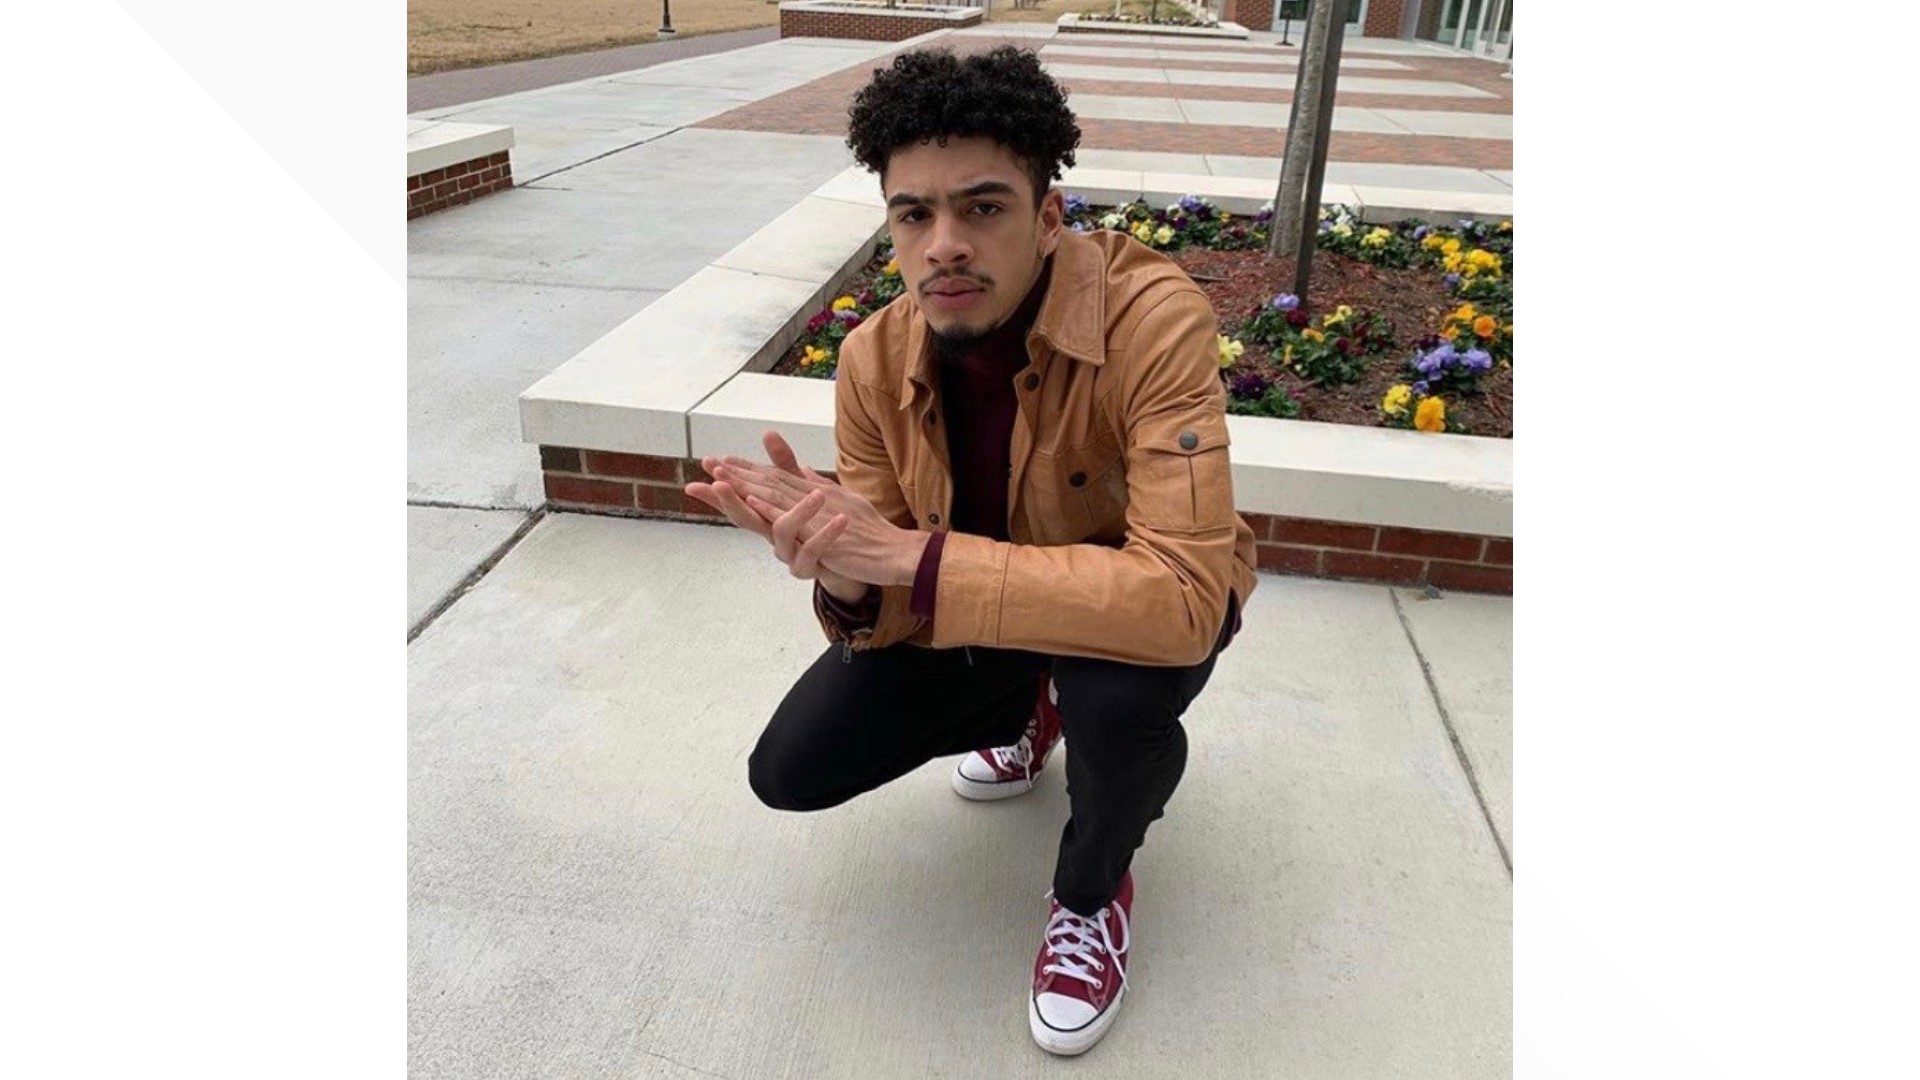 Elijah Armstrong, 21, faces two counts of first-degree murder. Luis Eduardo Zambrana was shot and killed at an Exxon gas station in Newport News. Now, his family is remembering the person Zambrana was.